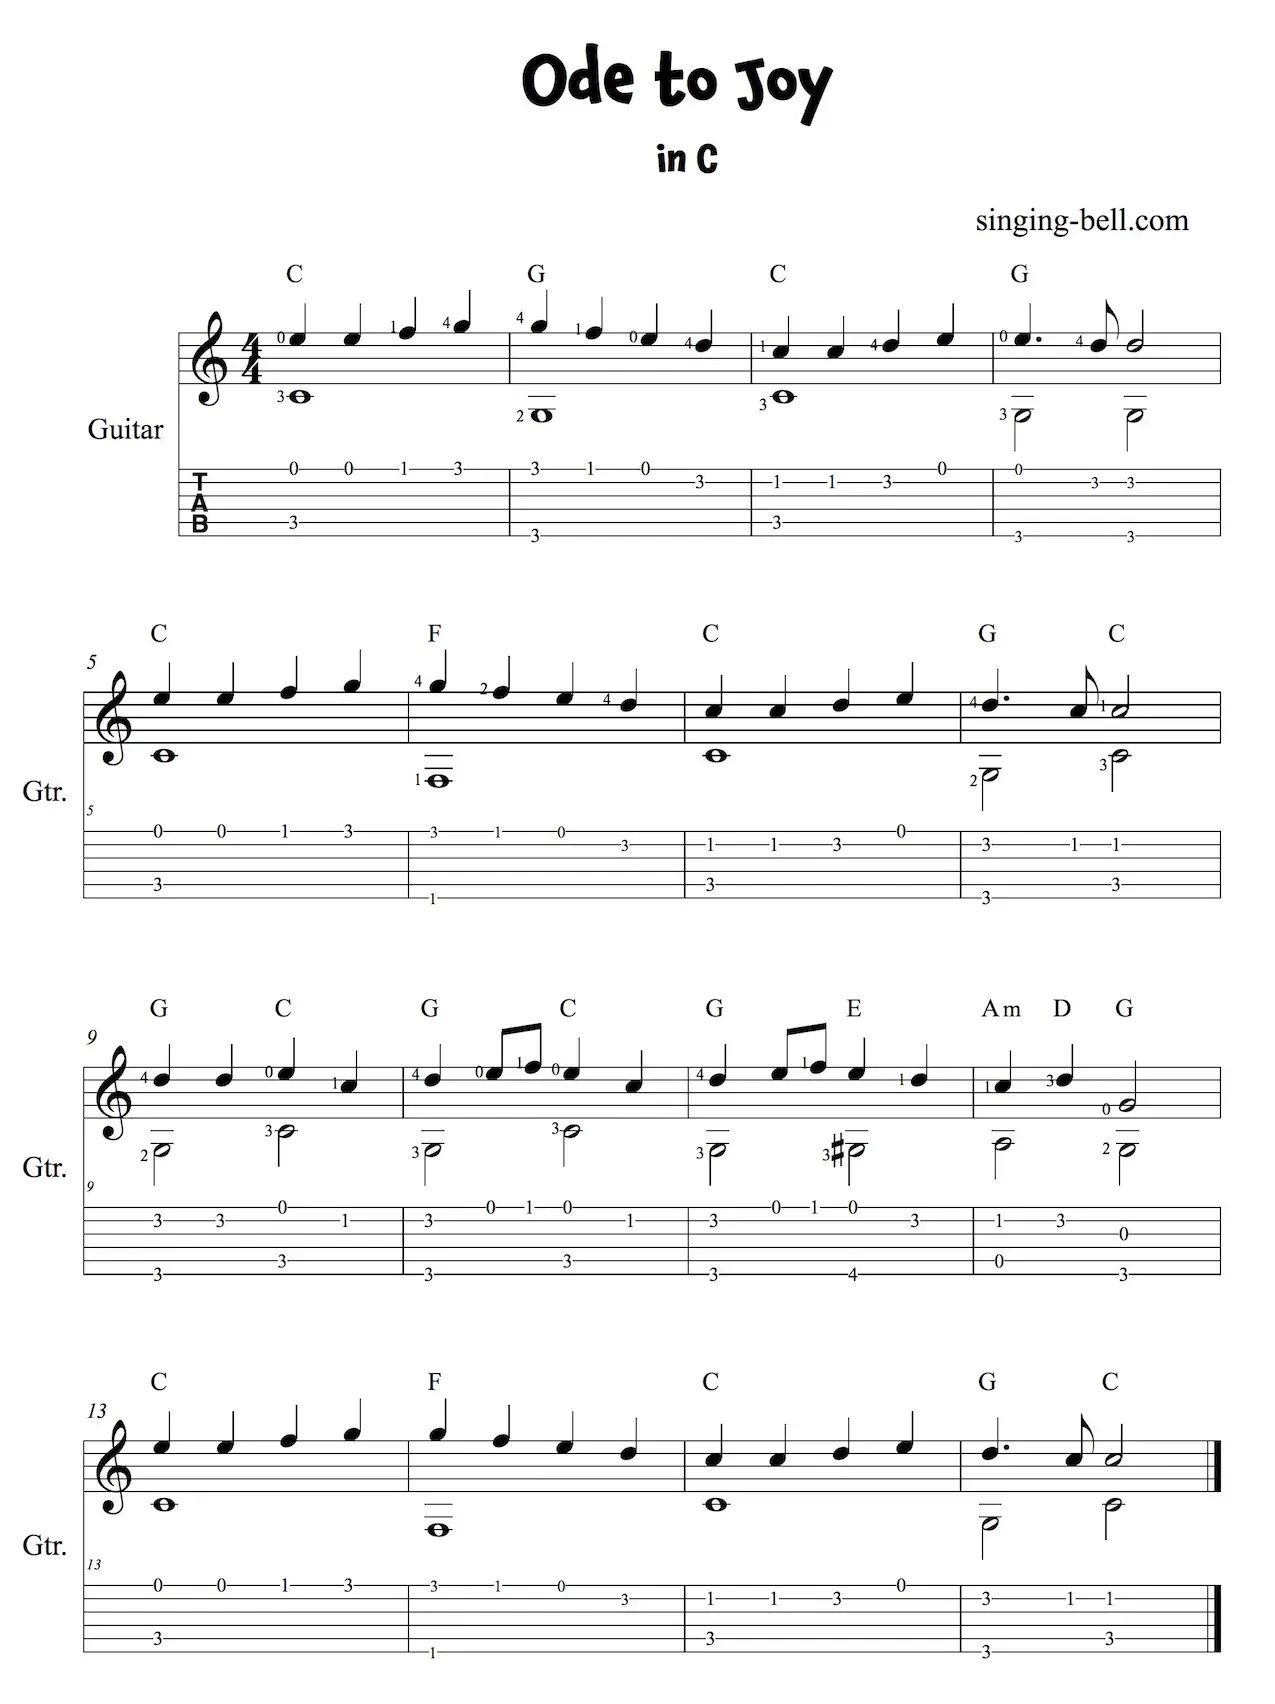 Ode to Joy Easy Guitar Sheet Music with notes chords and tablature in the key of C.